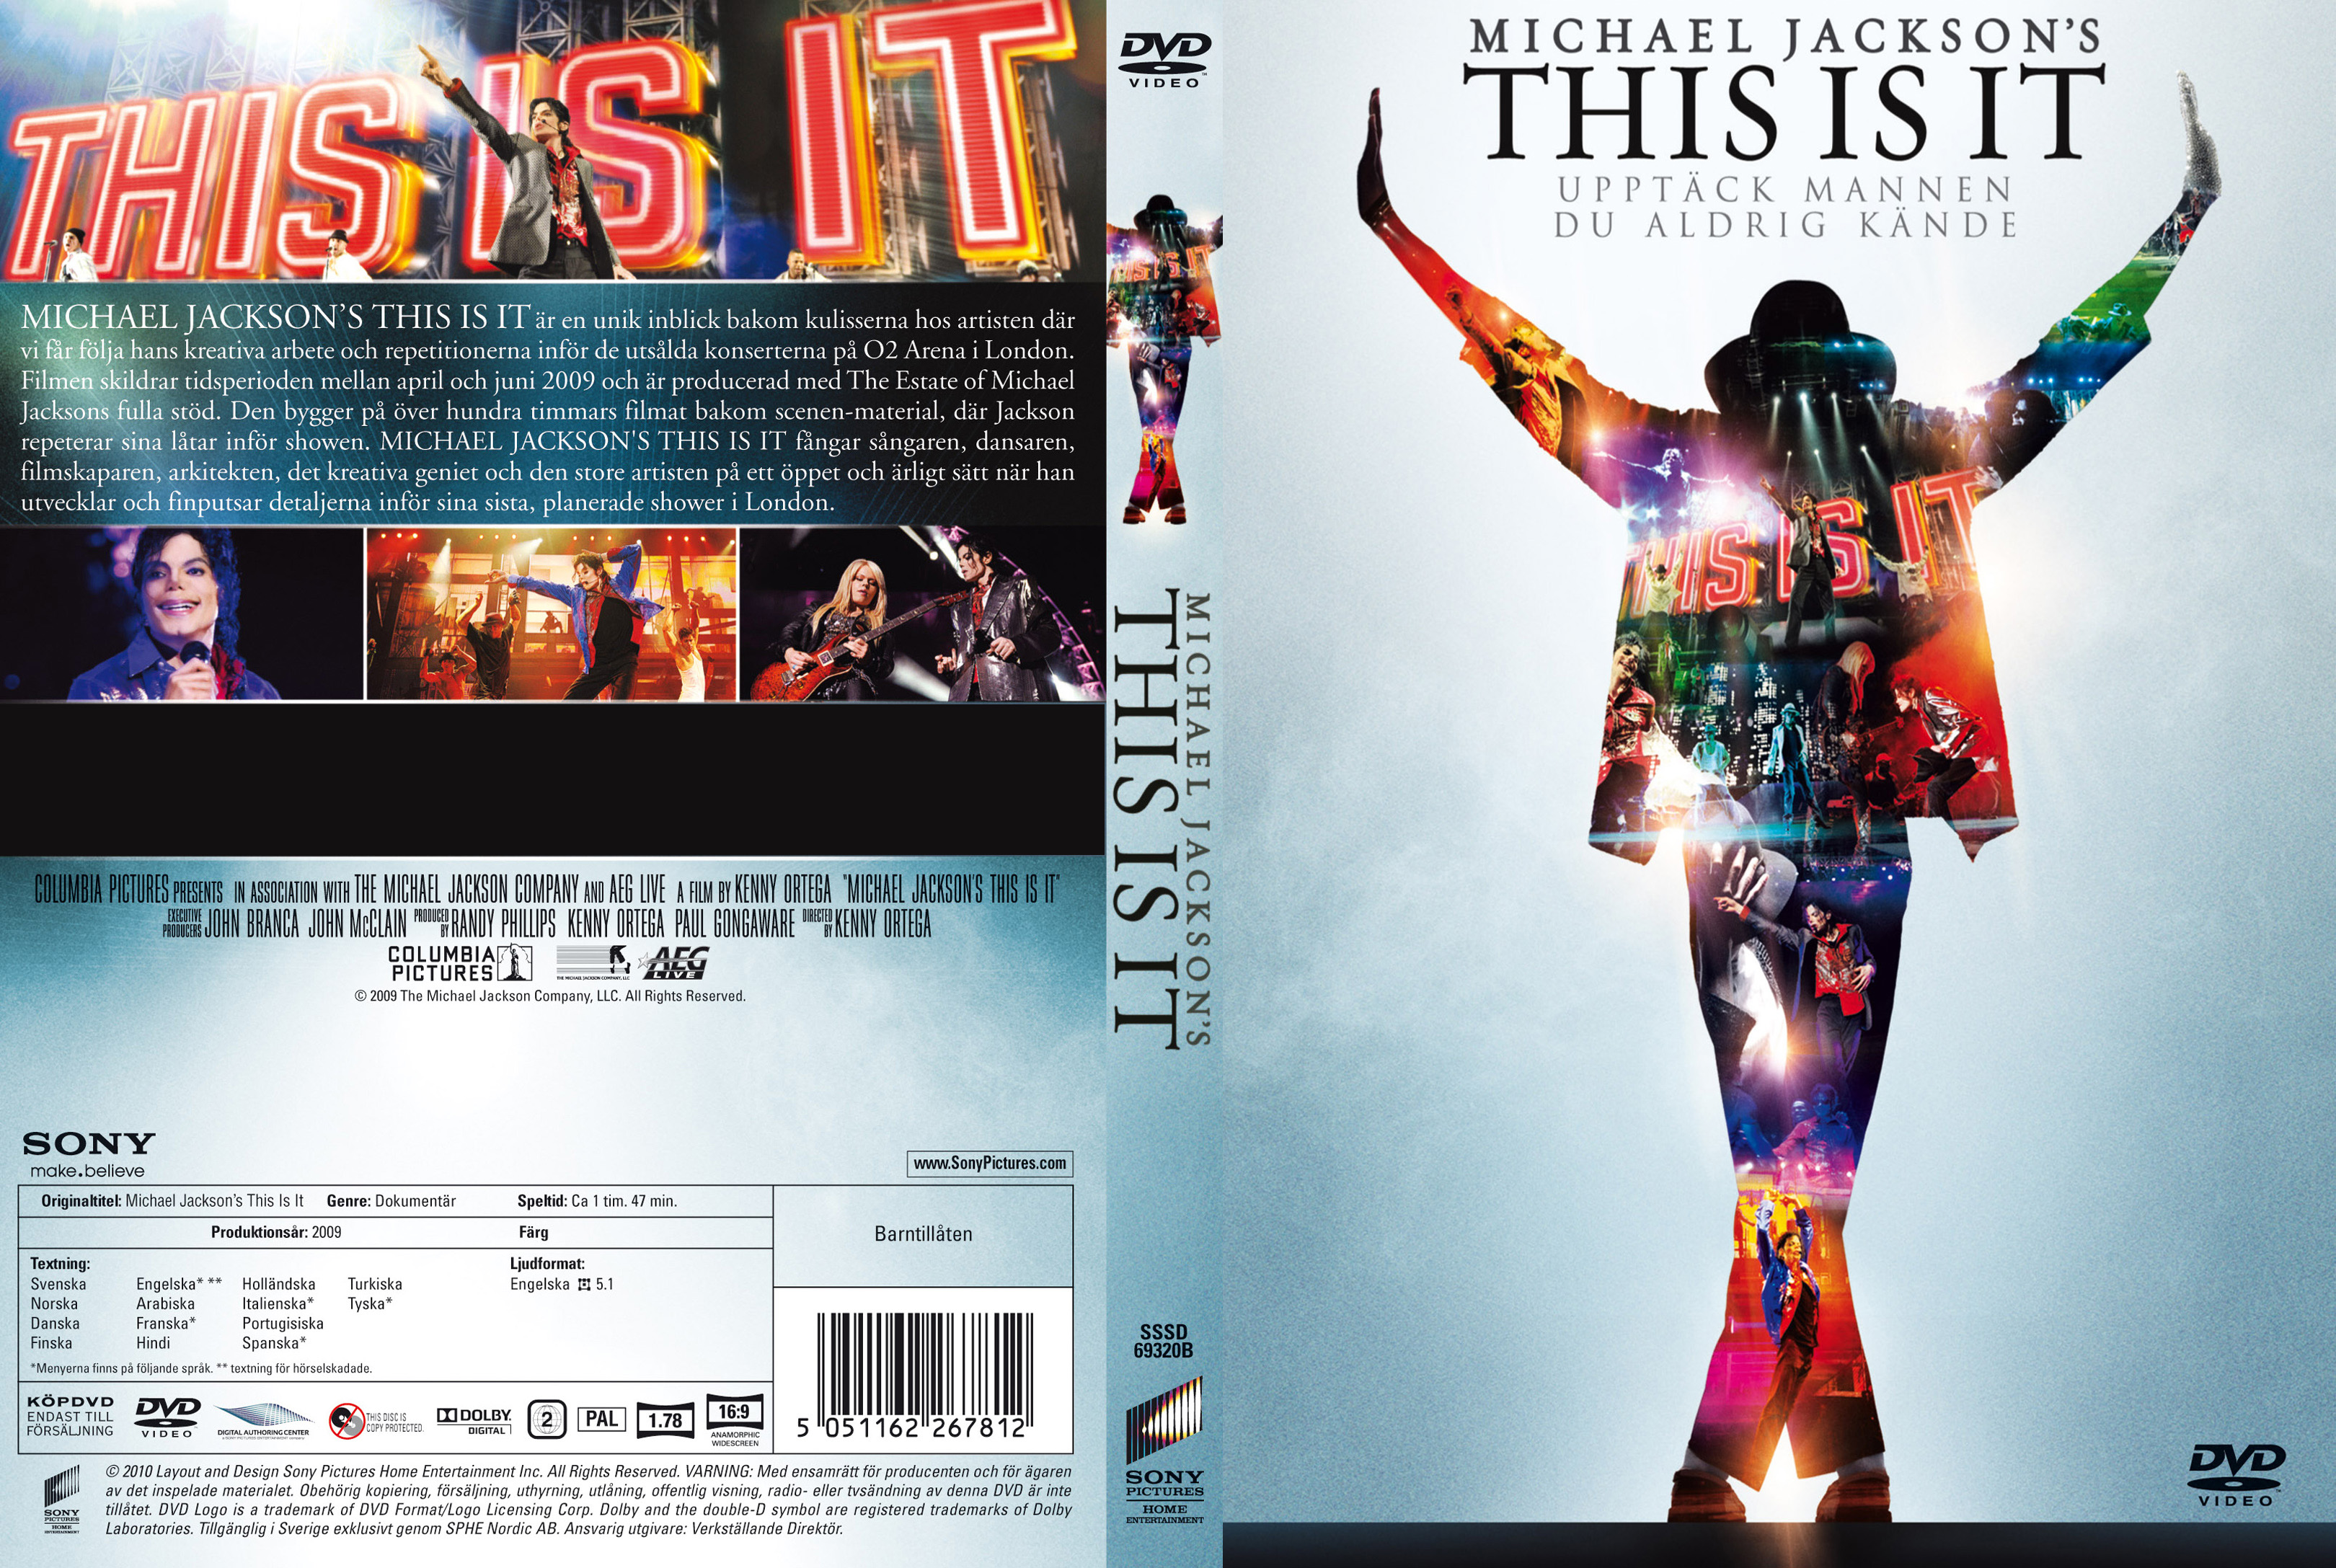 Michael jackson this is it dvdrip torrent national anthem whitney houston mp3 torrent